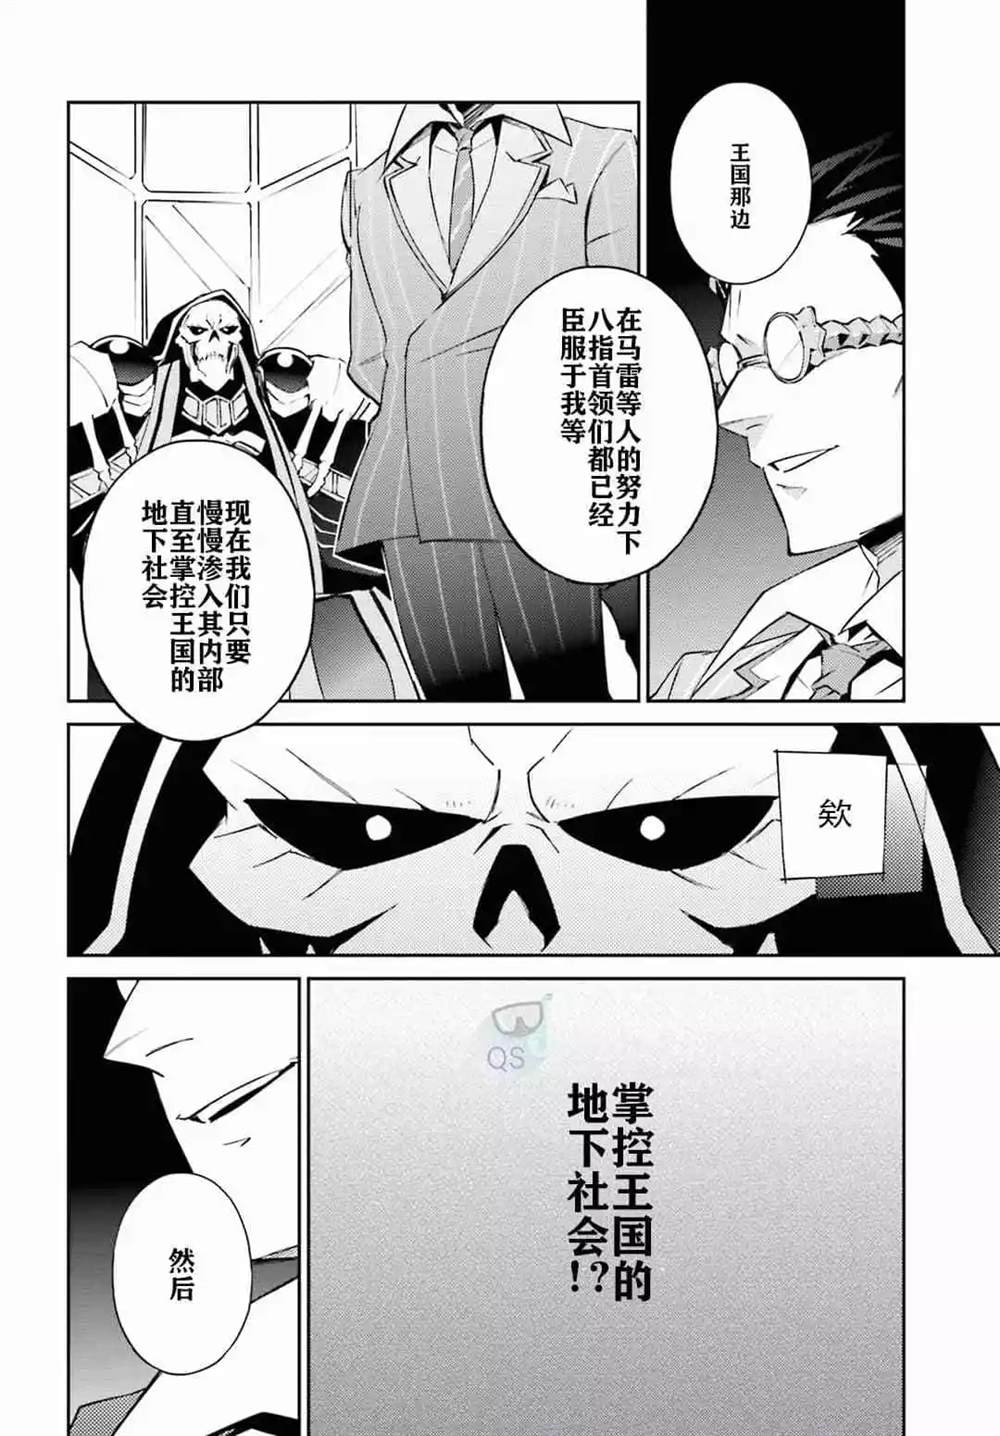 OVERLORD - 第53话 - 2